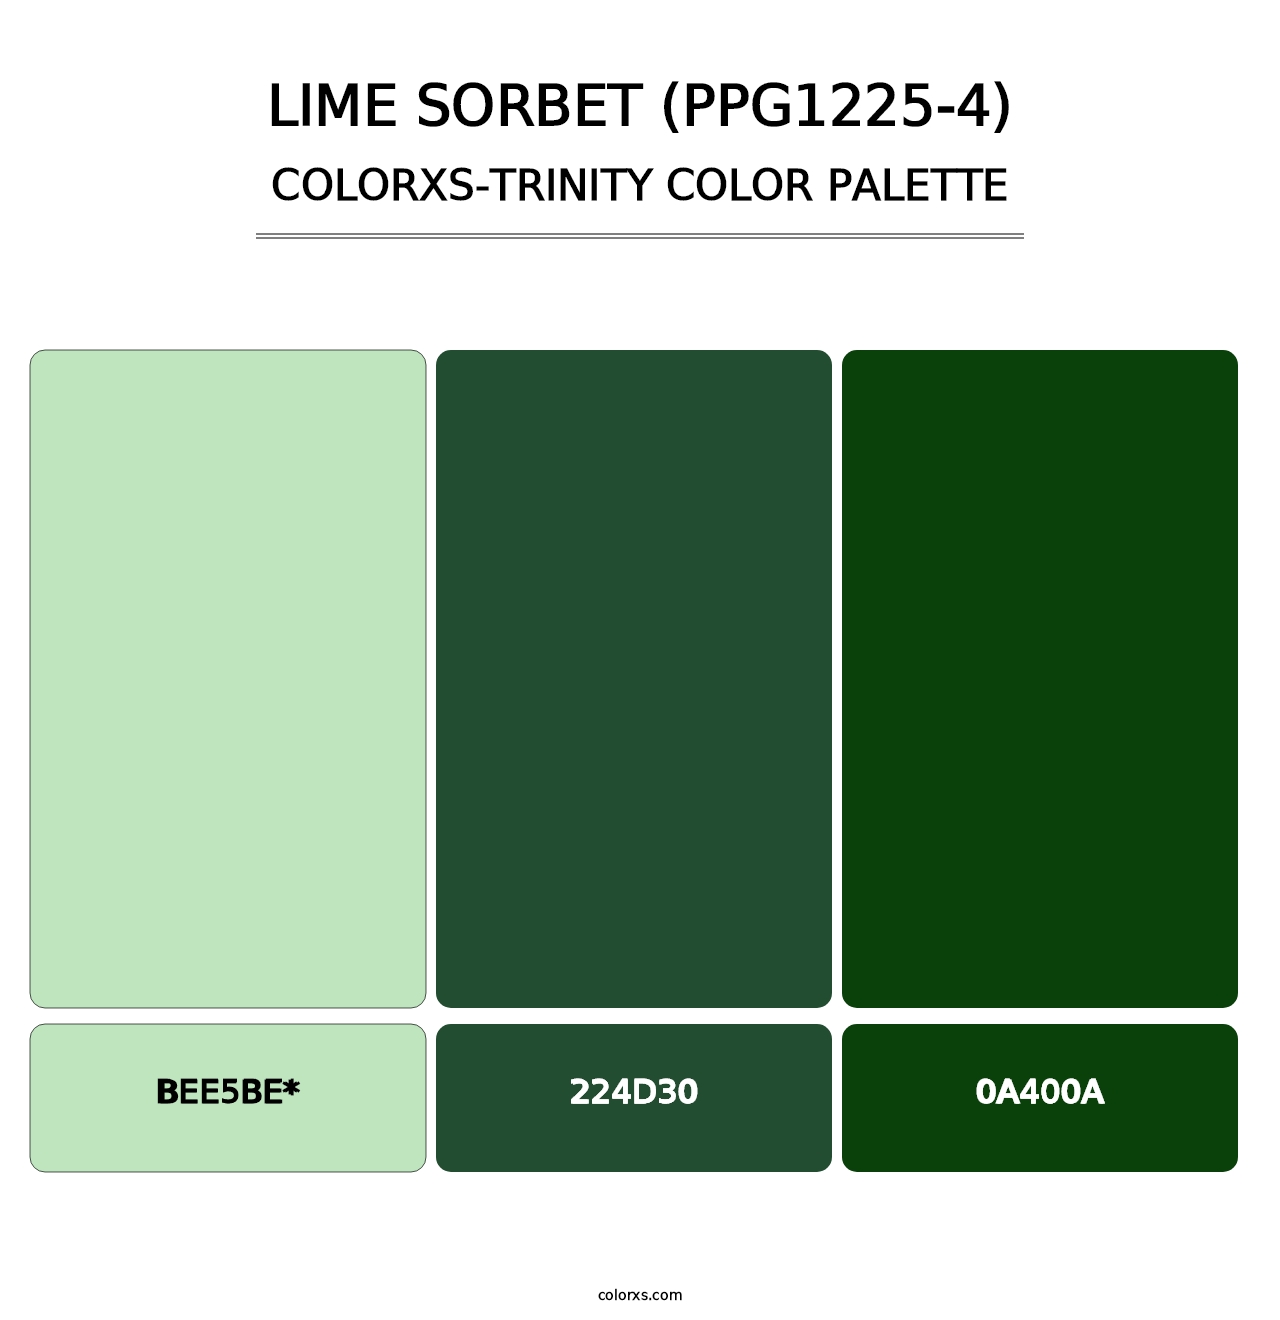 Lime Sorbet (PPG1225-4) - Colorxs Trinity Palette